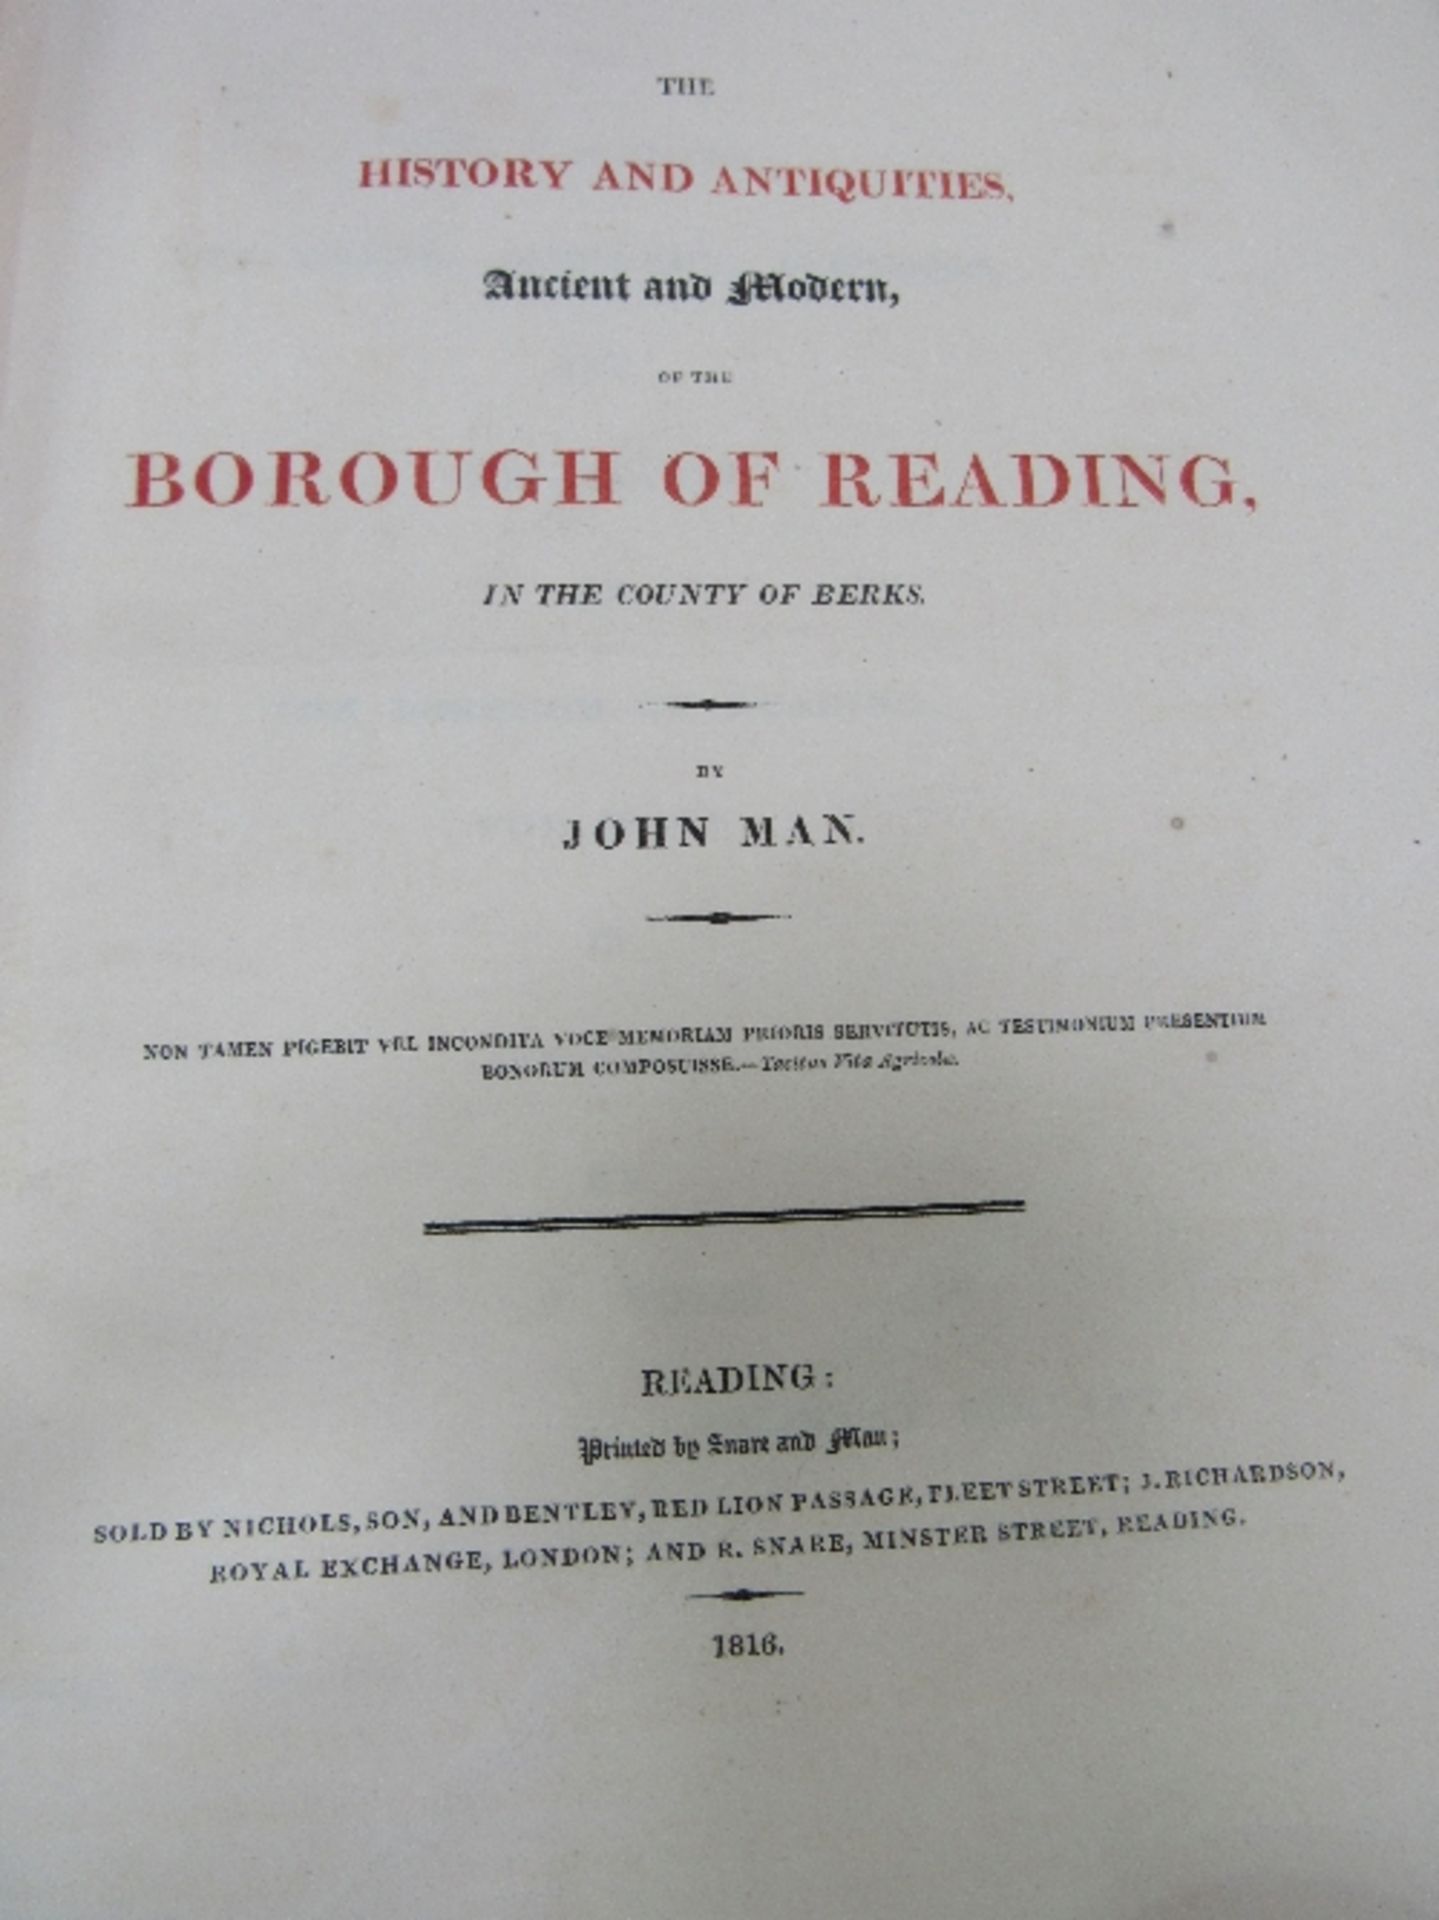 History & Antiquities of the Borough of Reading, dated 1816, original copy, rebound. Estimate £30- - Image 2 of 3